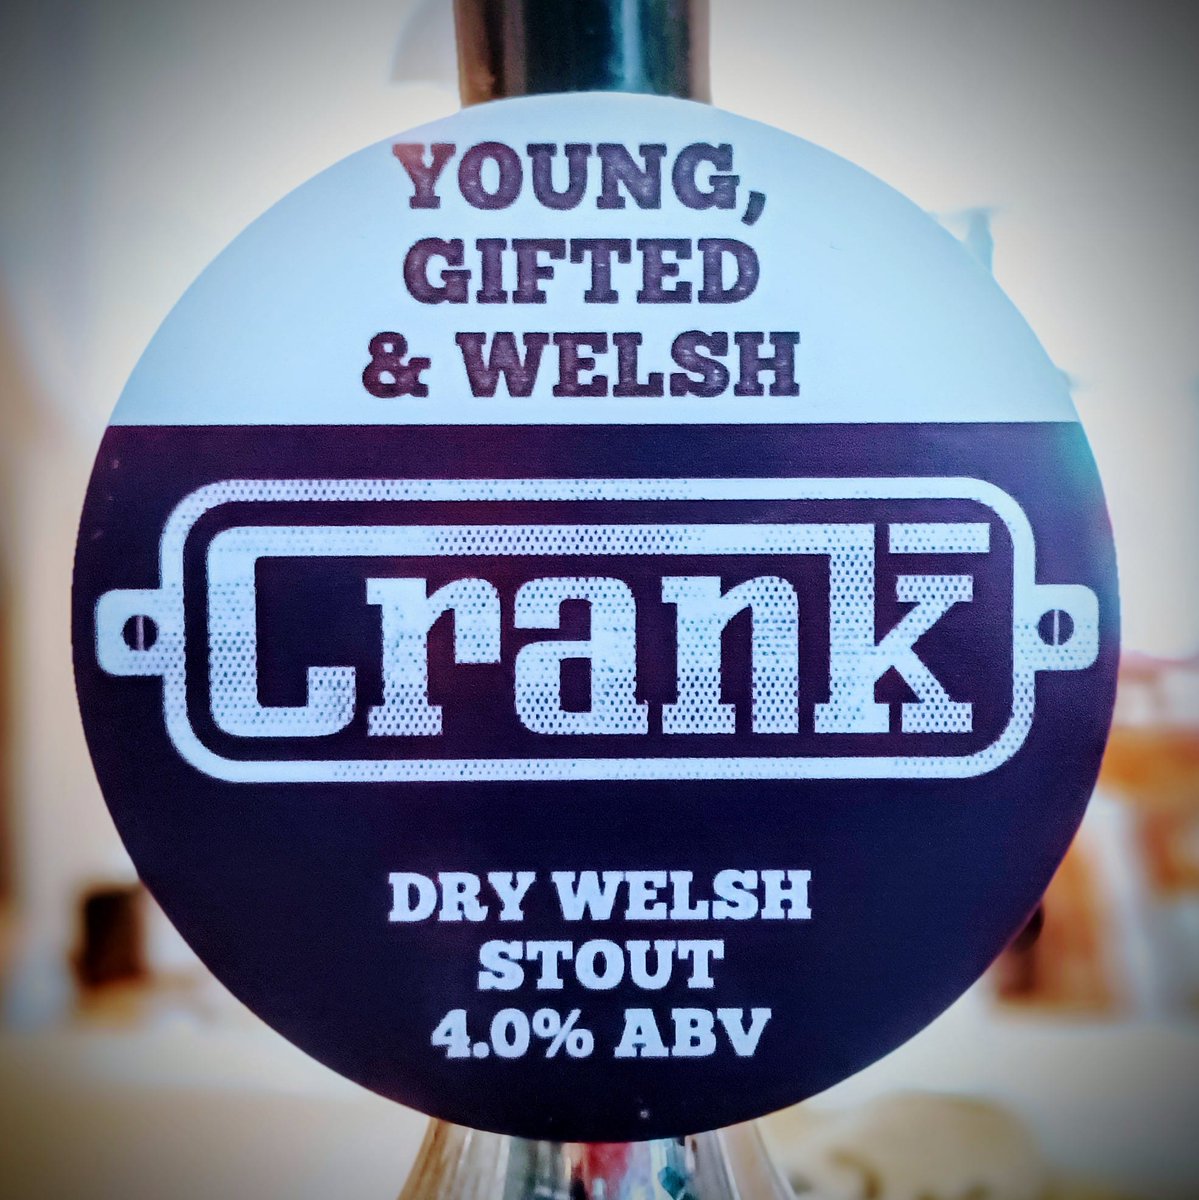 👀 LOOK what's back in cask! Get your pumps on our freshly brewed Dry Welsh Stout. Toasted, smooth & dry it's the perfect Autumnal pint for those dark beer fans. #cwrwial #crankbeers #stout #welshbeer #welshstout #cwrwcymru #welshbeer #supportyourbrewerys #supportyourlocal